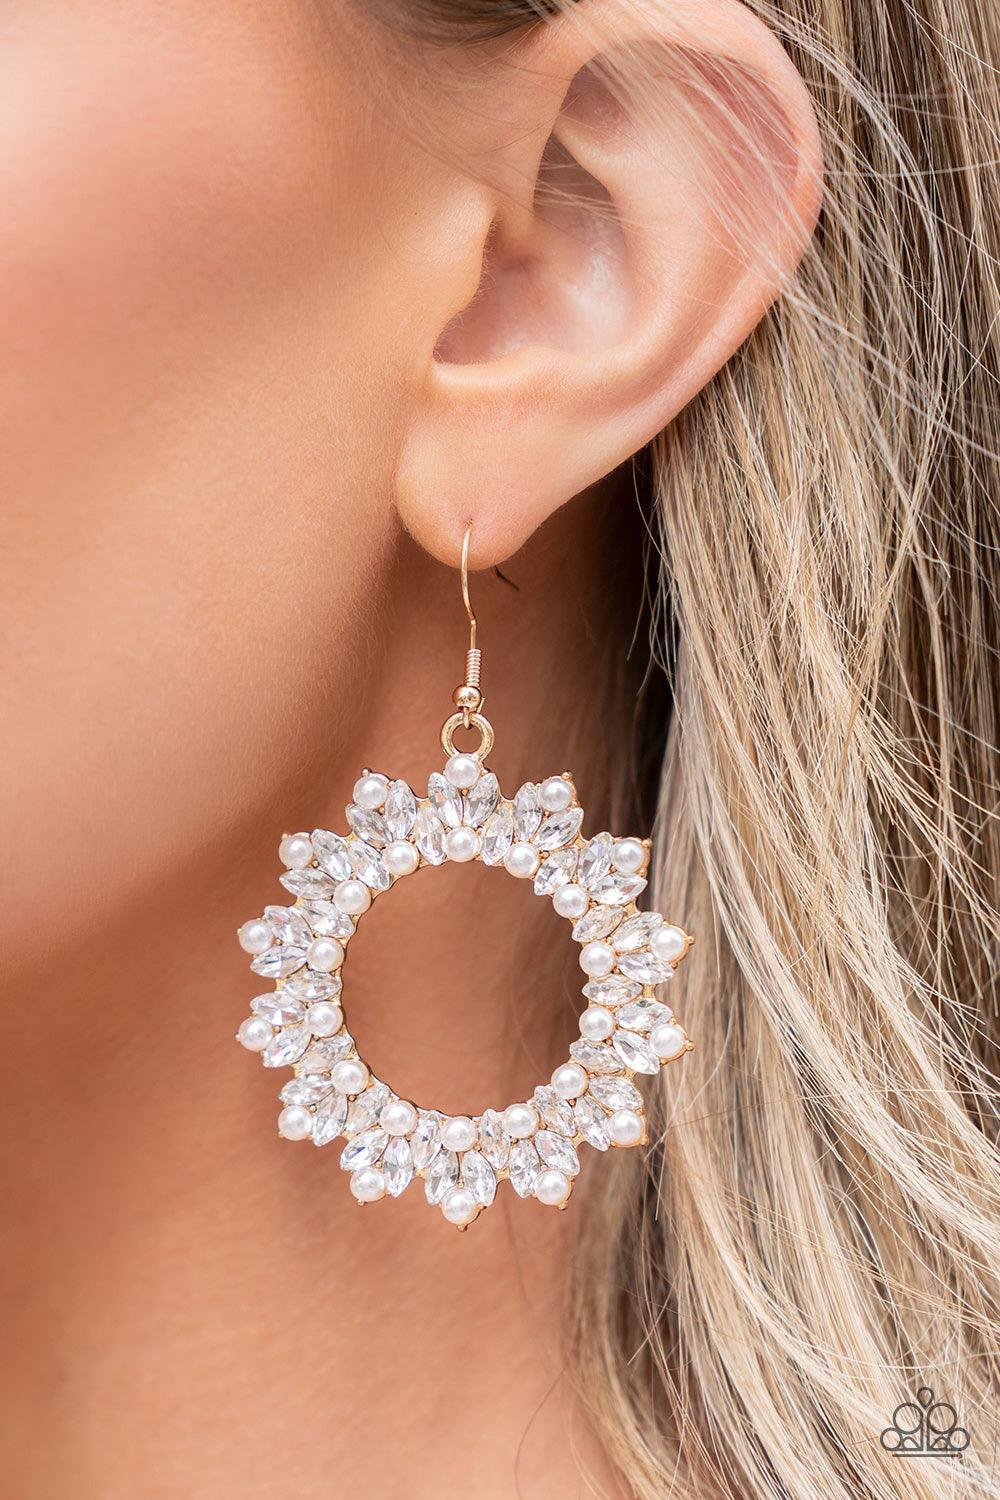 Paparazzi Accessories Combustible Couture - Gold A bubbly collection of dainty white pearls and marquise-cut rhinestones explodes across the front of a gold wreath, resulting in jaw-dropping dazzle. Earring attaches to a standard fishhook fitting. Sold as